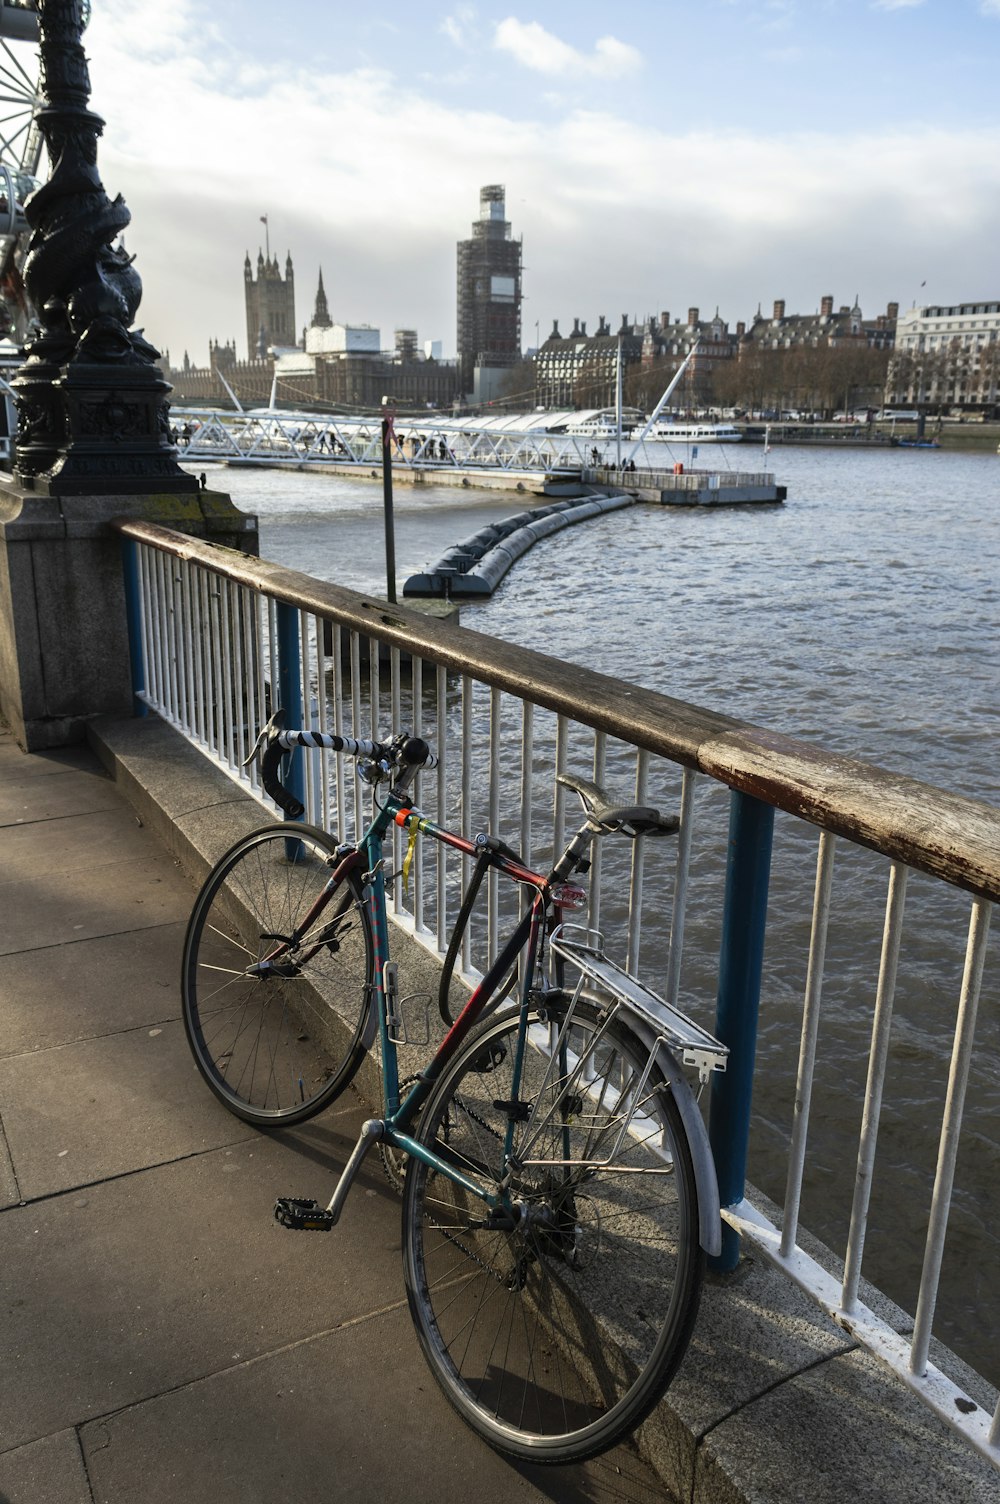 black and red city bike parked beside gray metal railings near body of water during daytime